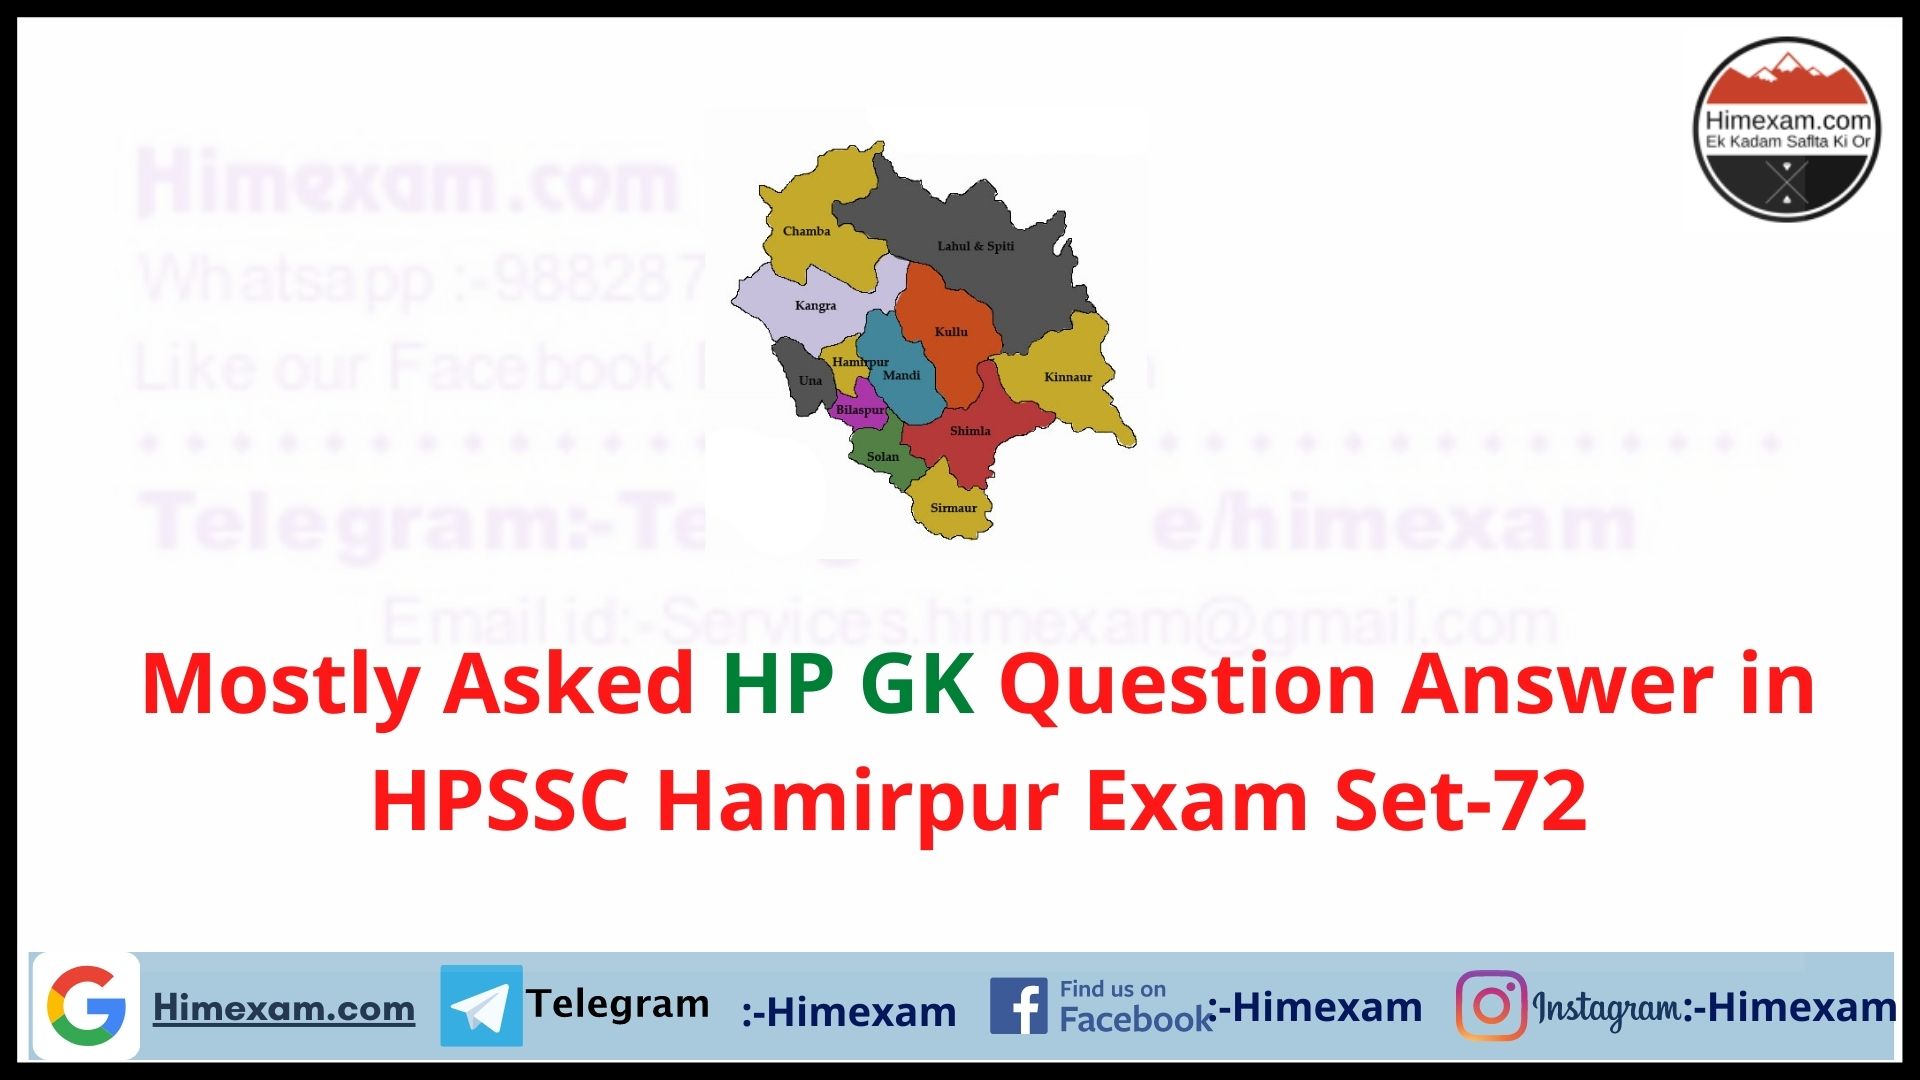 Mostly Asked HP GK Question Answer in HPSSC Hamirpur Exam Set-72